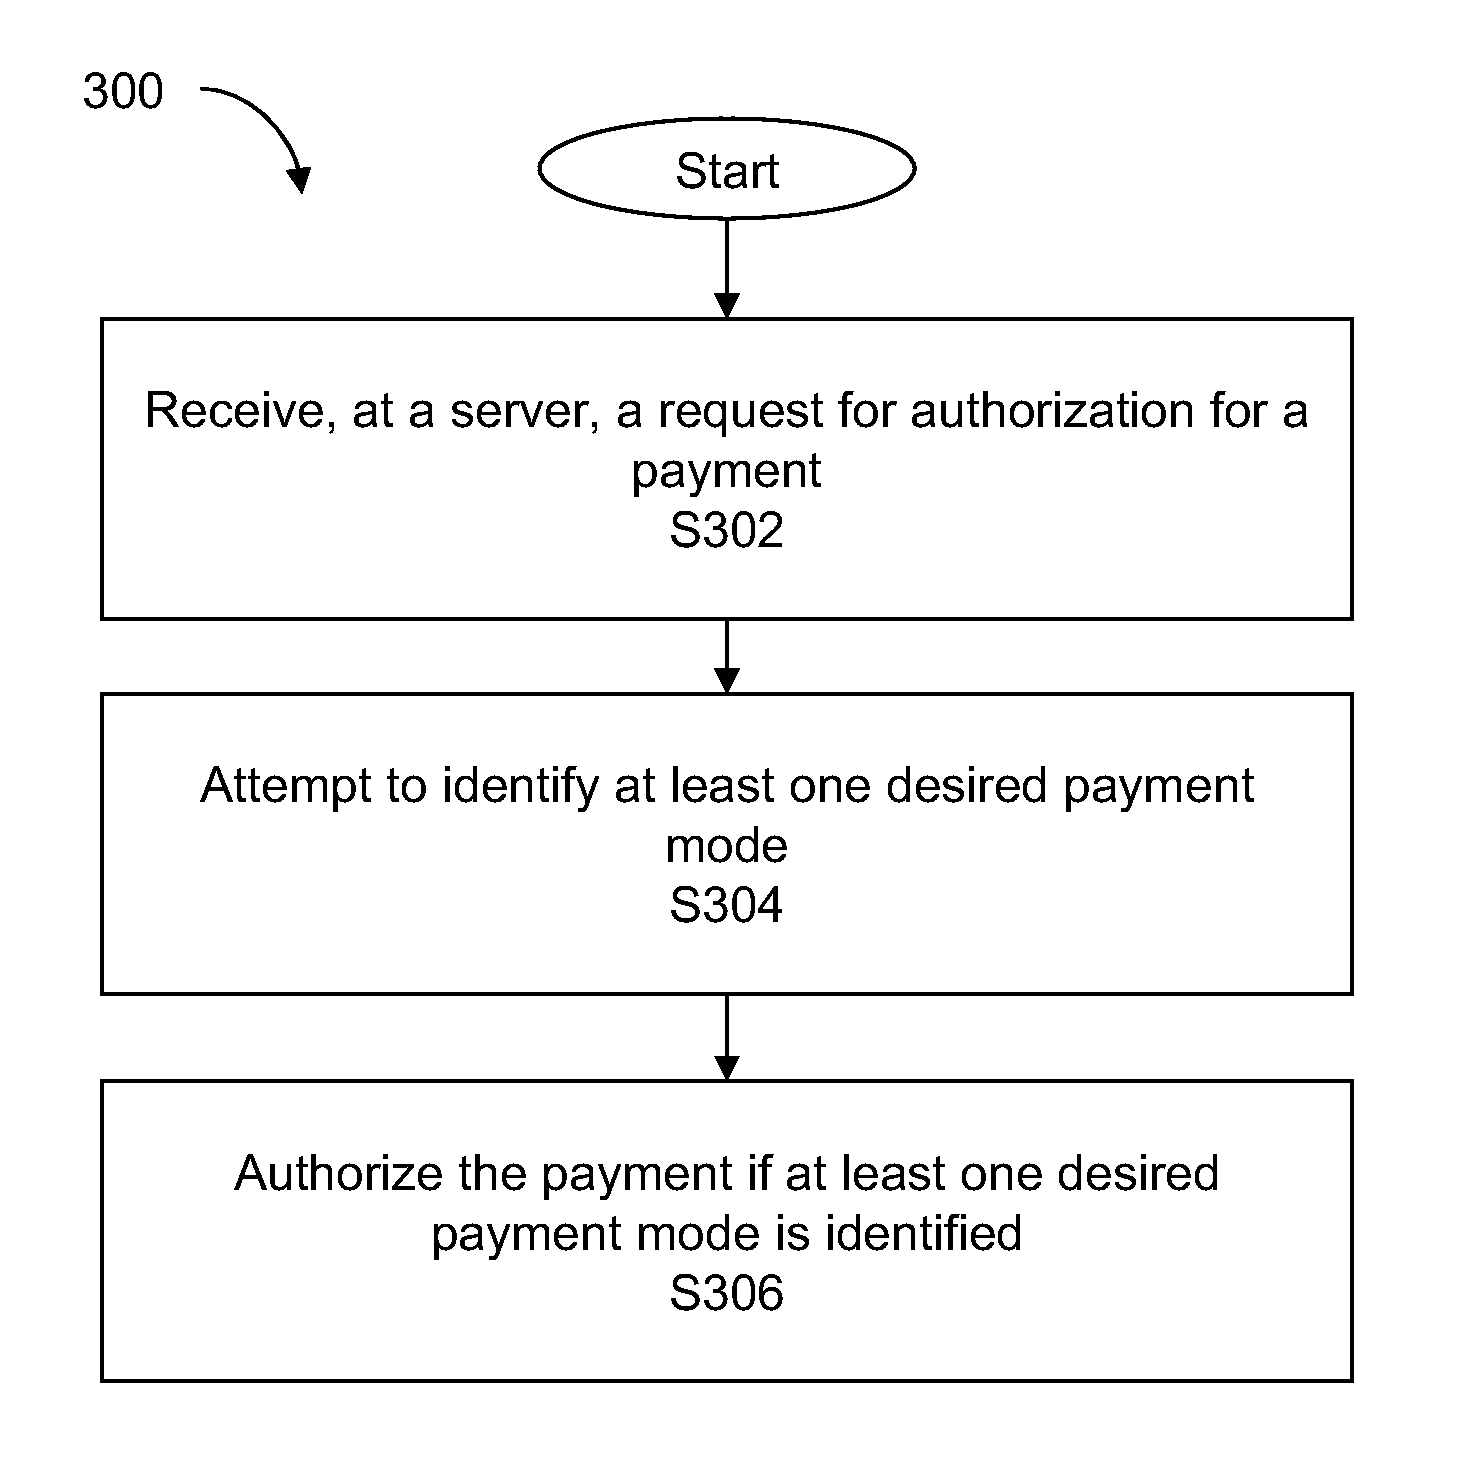 Systems, methods, and computer products for processing payments using a proxy card